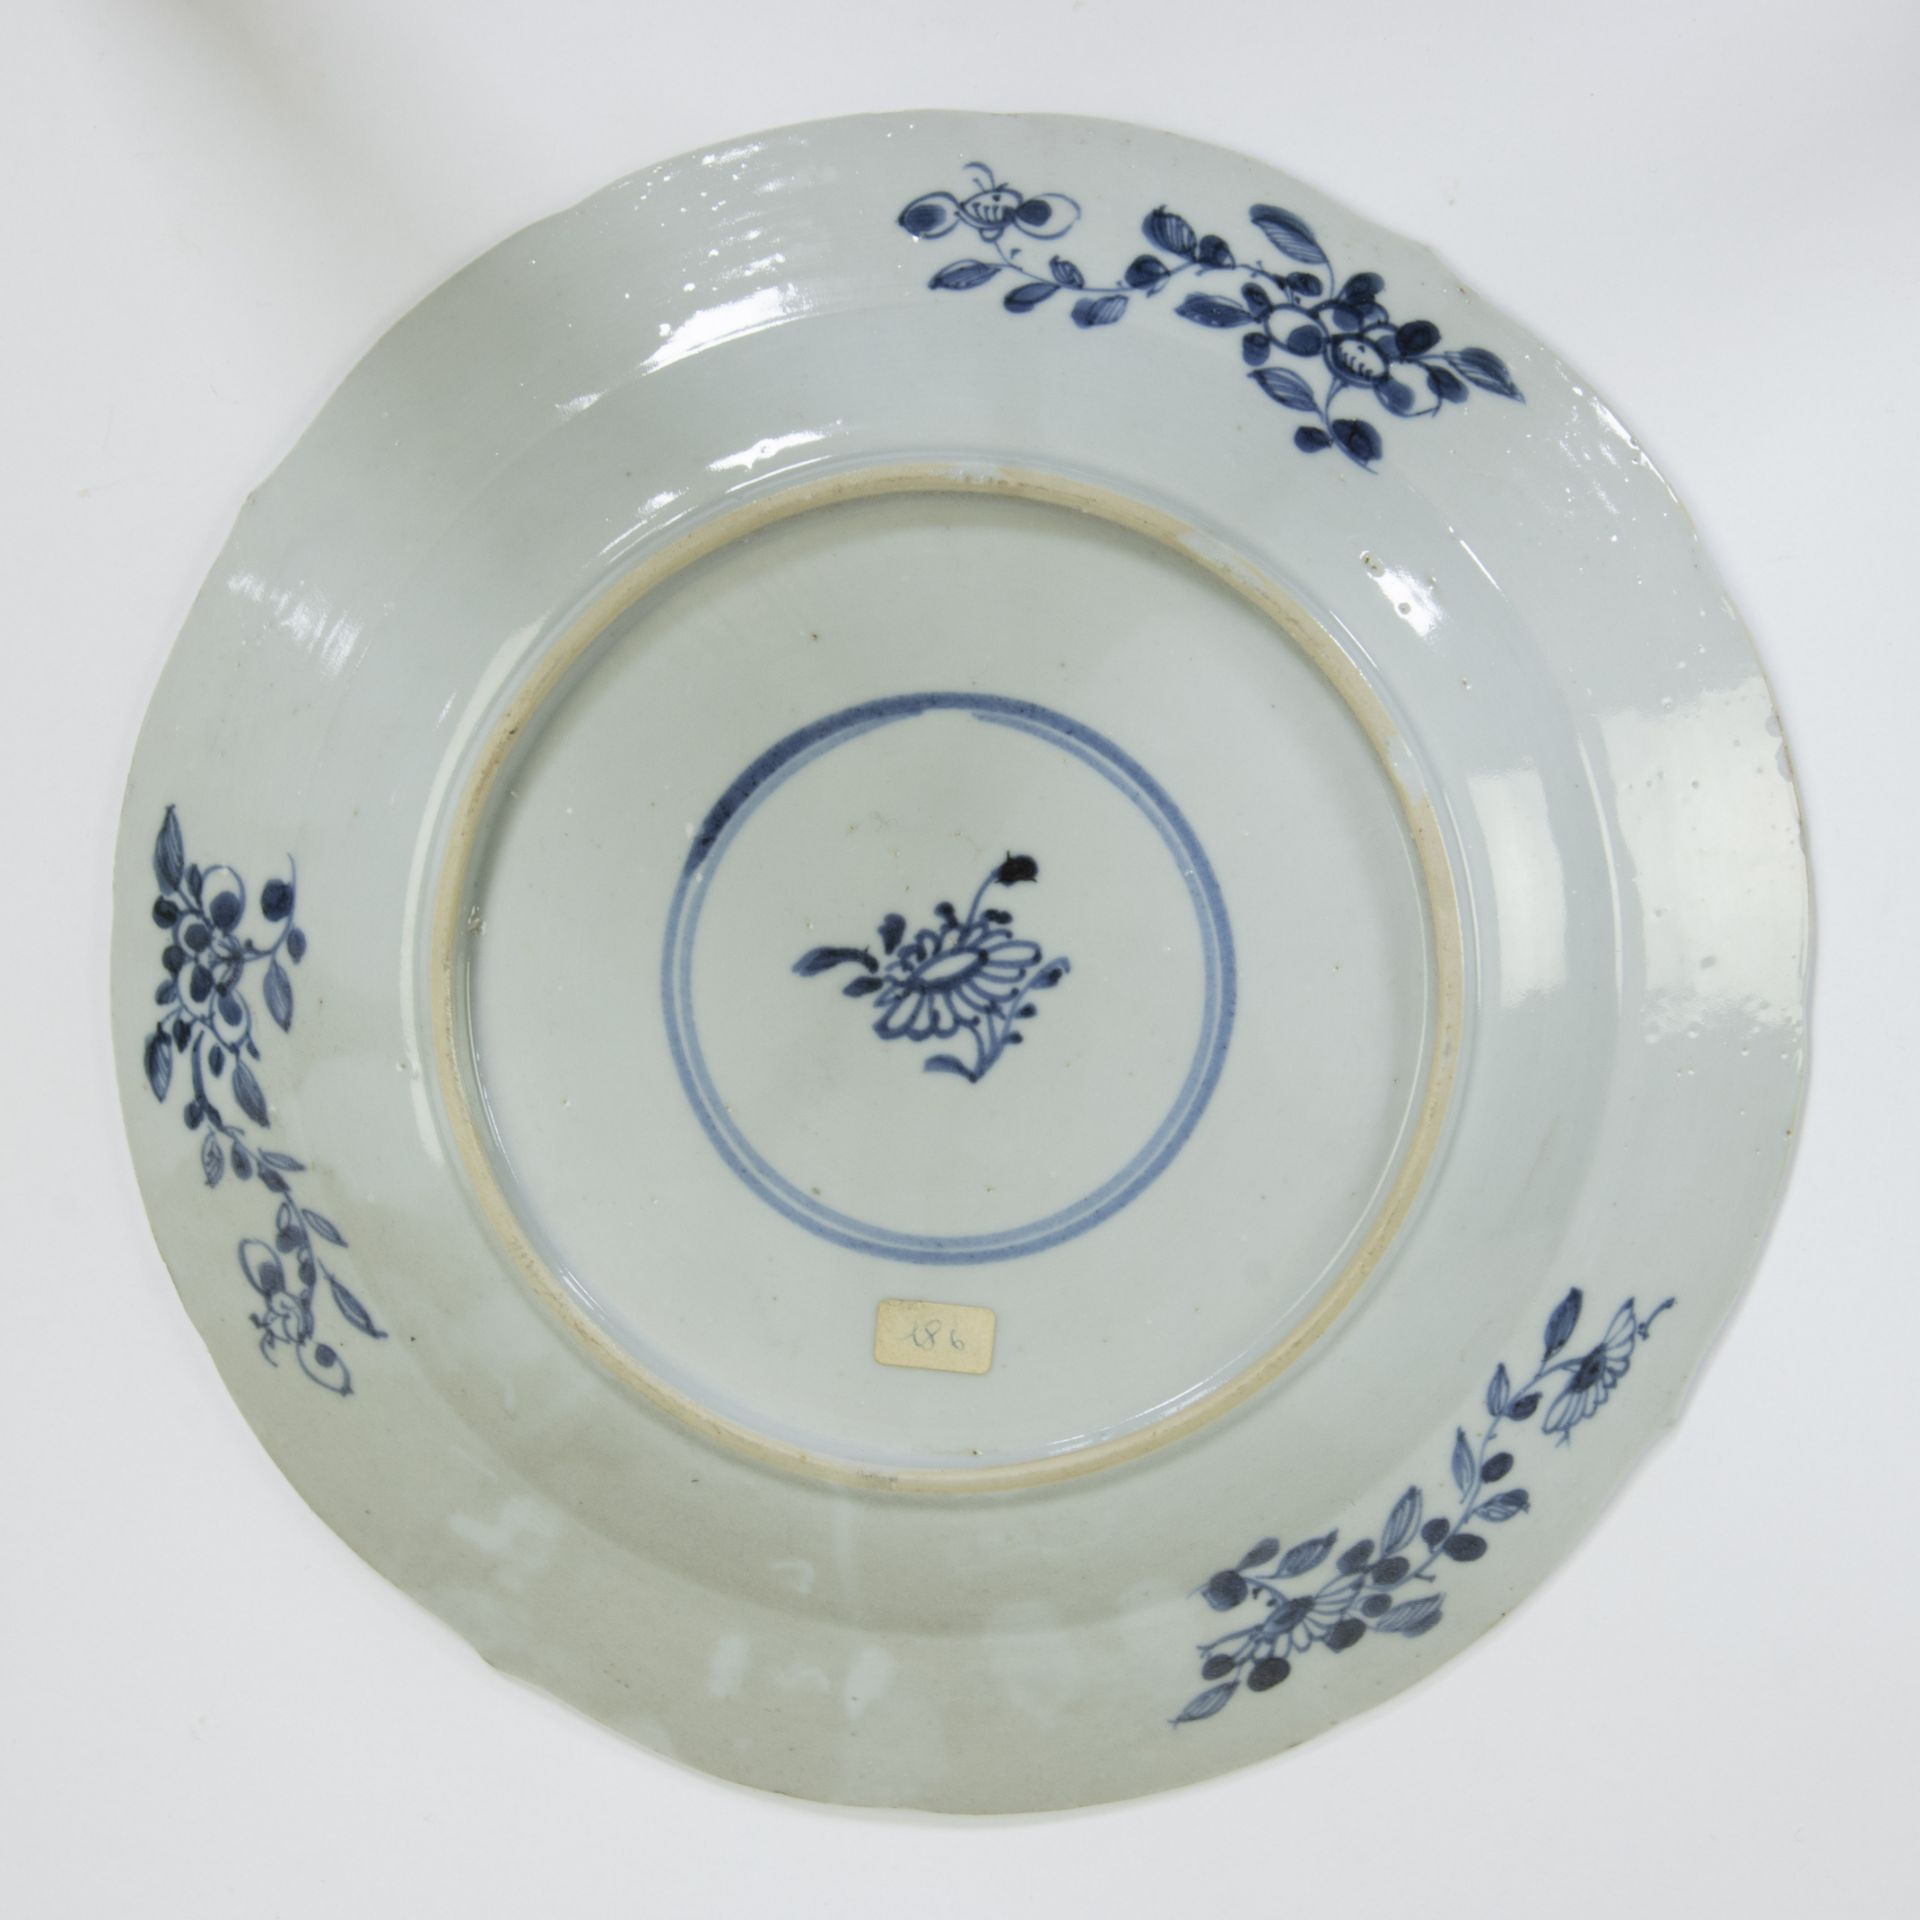 2 Chinese Imari plates and 4 blue and white plates, 18th century - Image 7 of 13